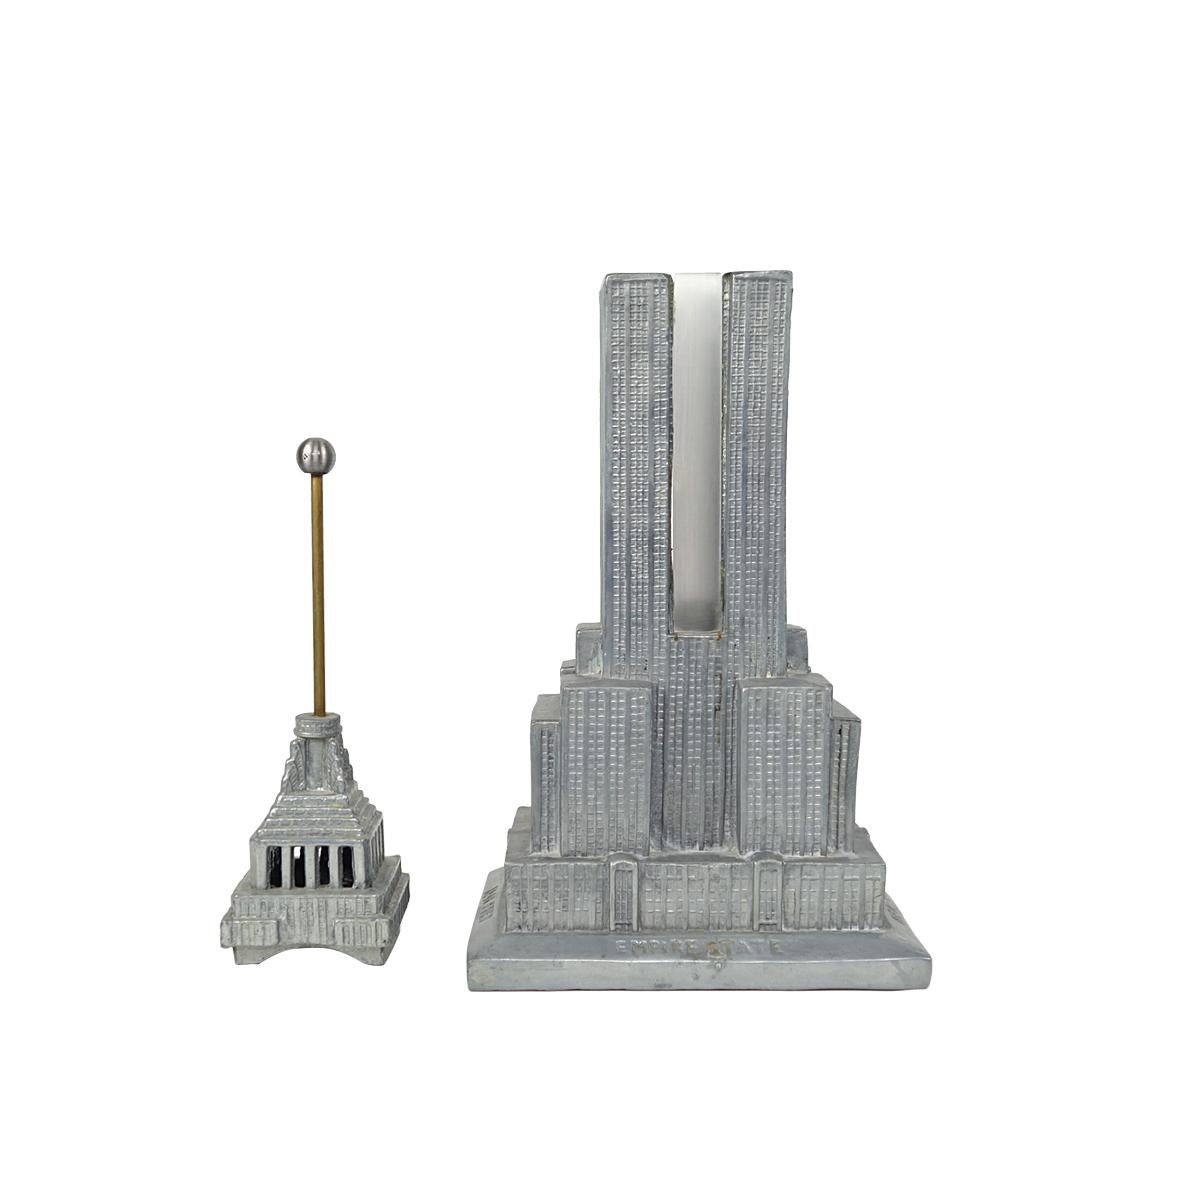 Metal Table Lamp by Sarsaparilla Deco Designs Model of Empire State Building For Sale